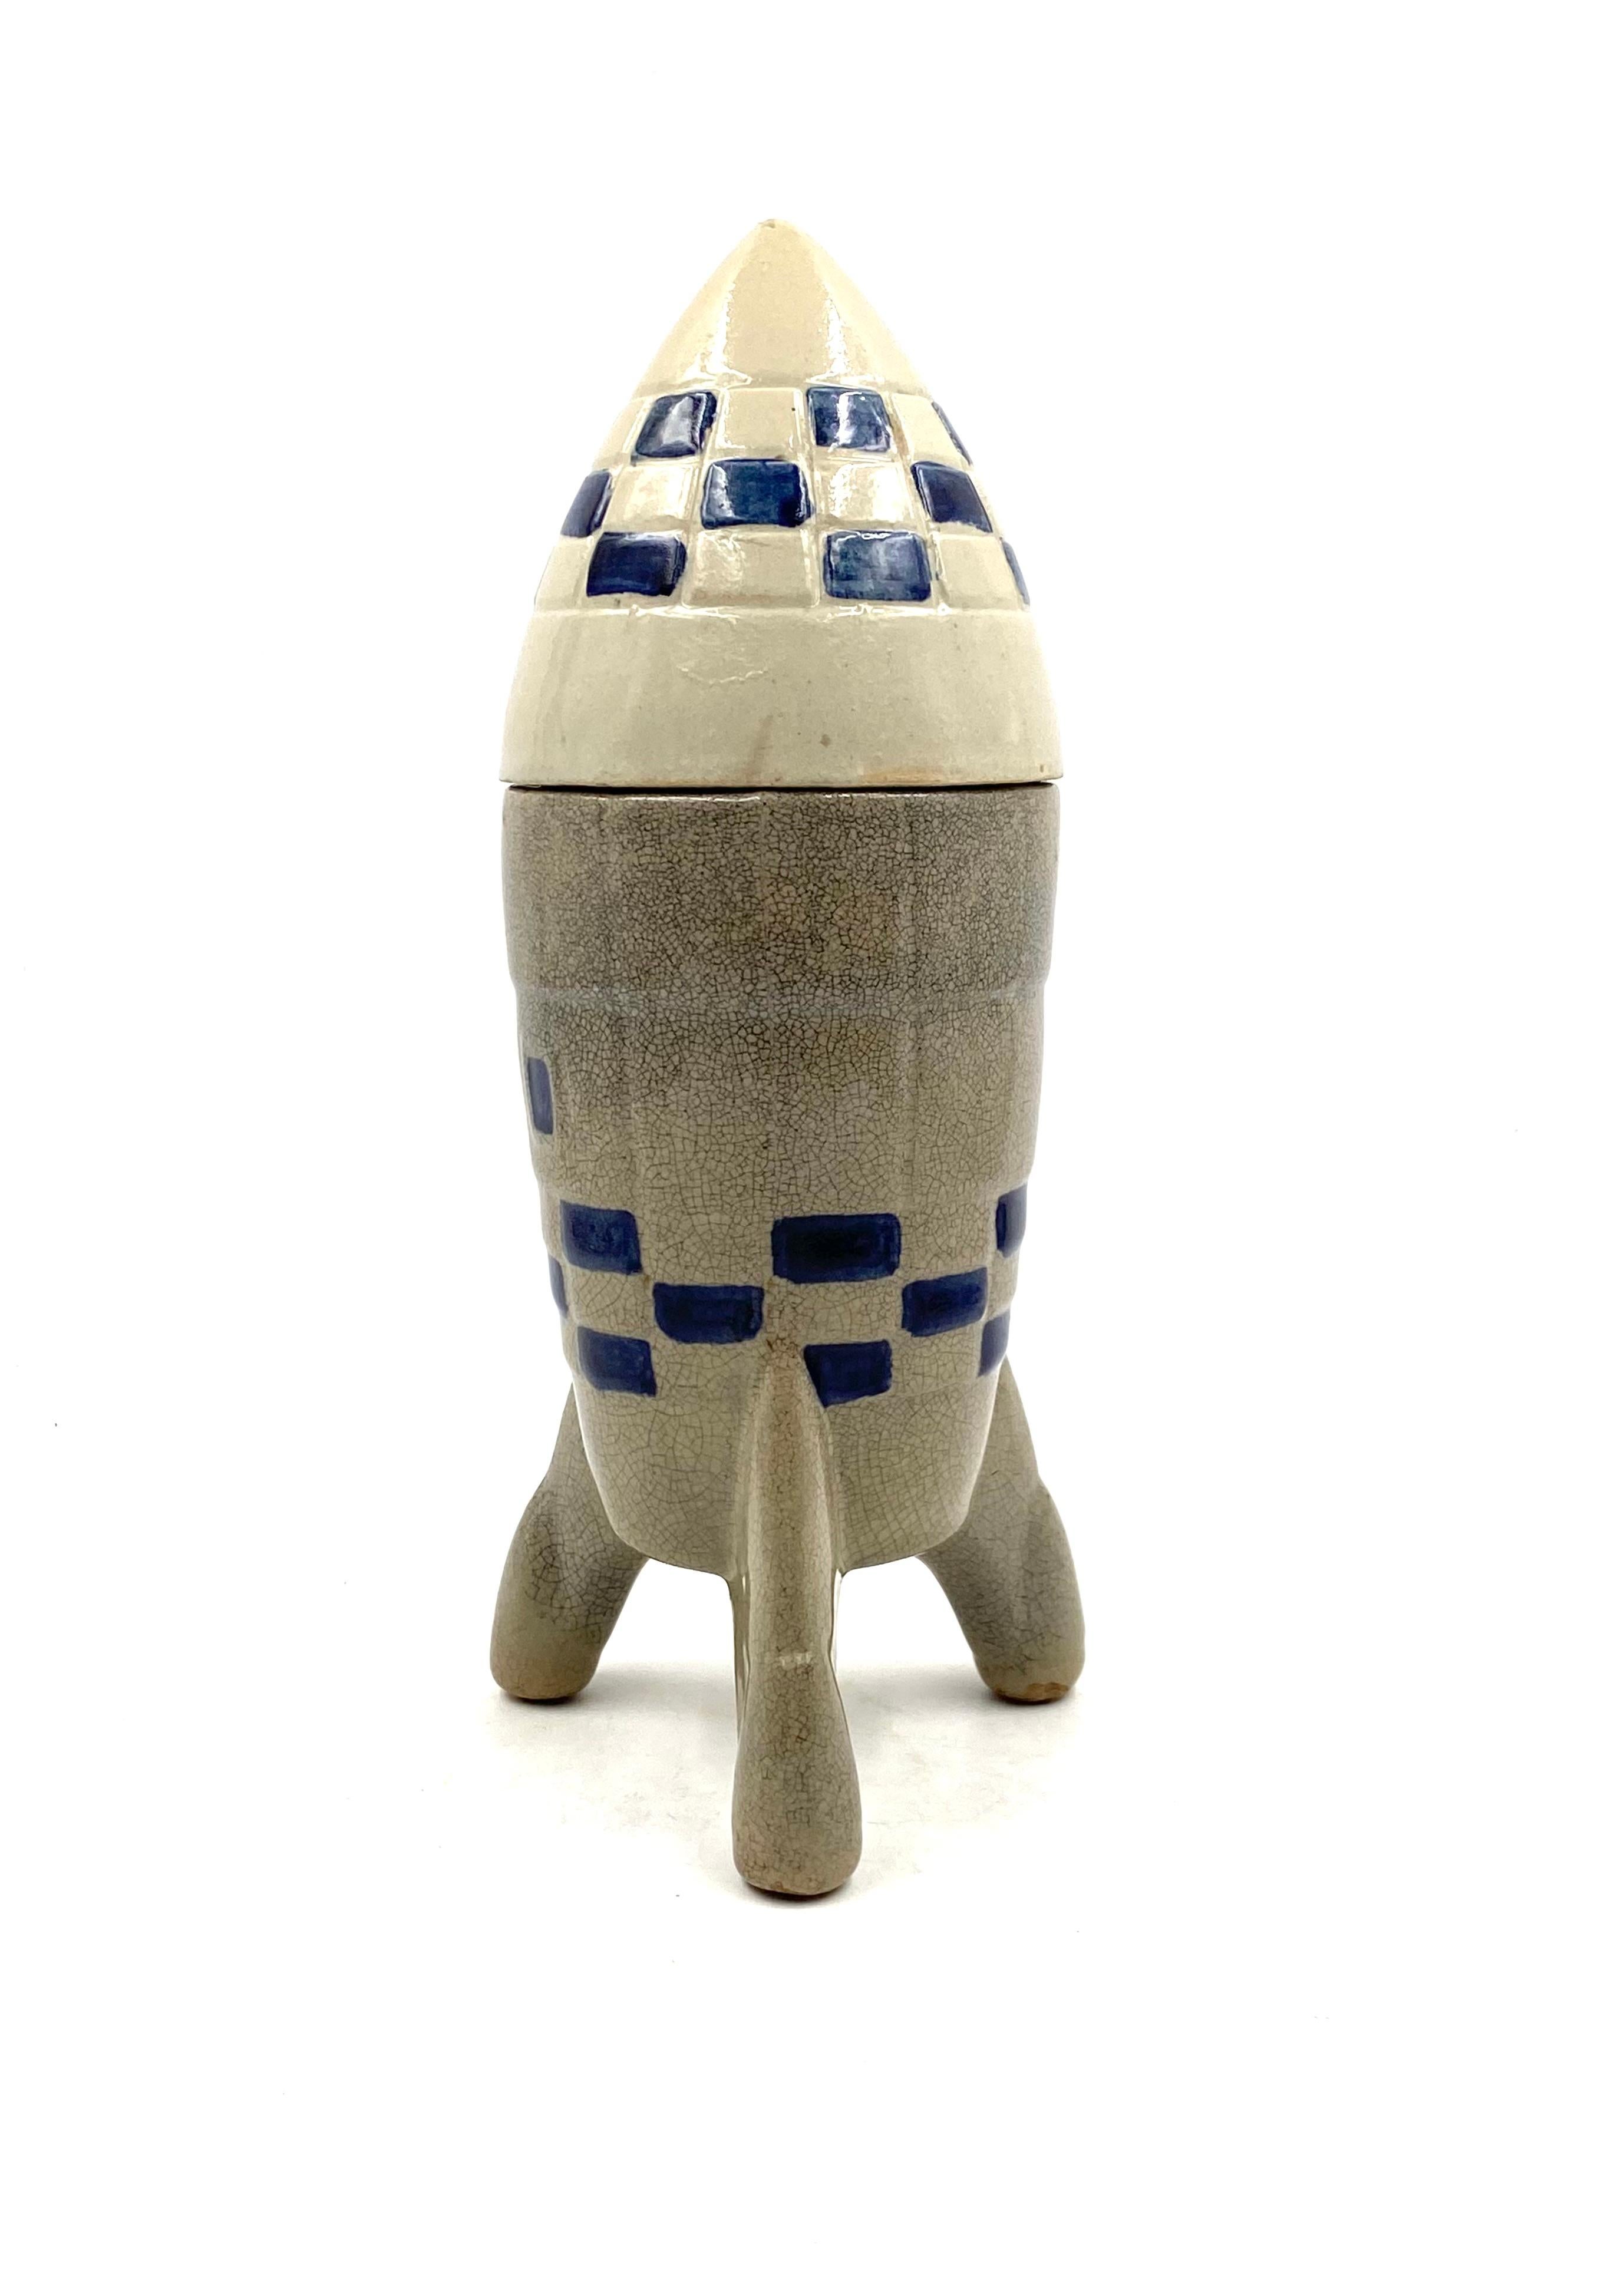 Mid-20th Century Ceramic Rocket / Spaceship Bottle / Decanter, France, 1940s-1950s For Sale